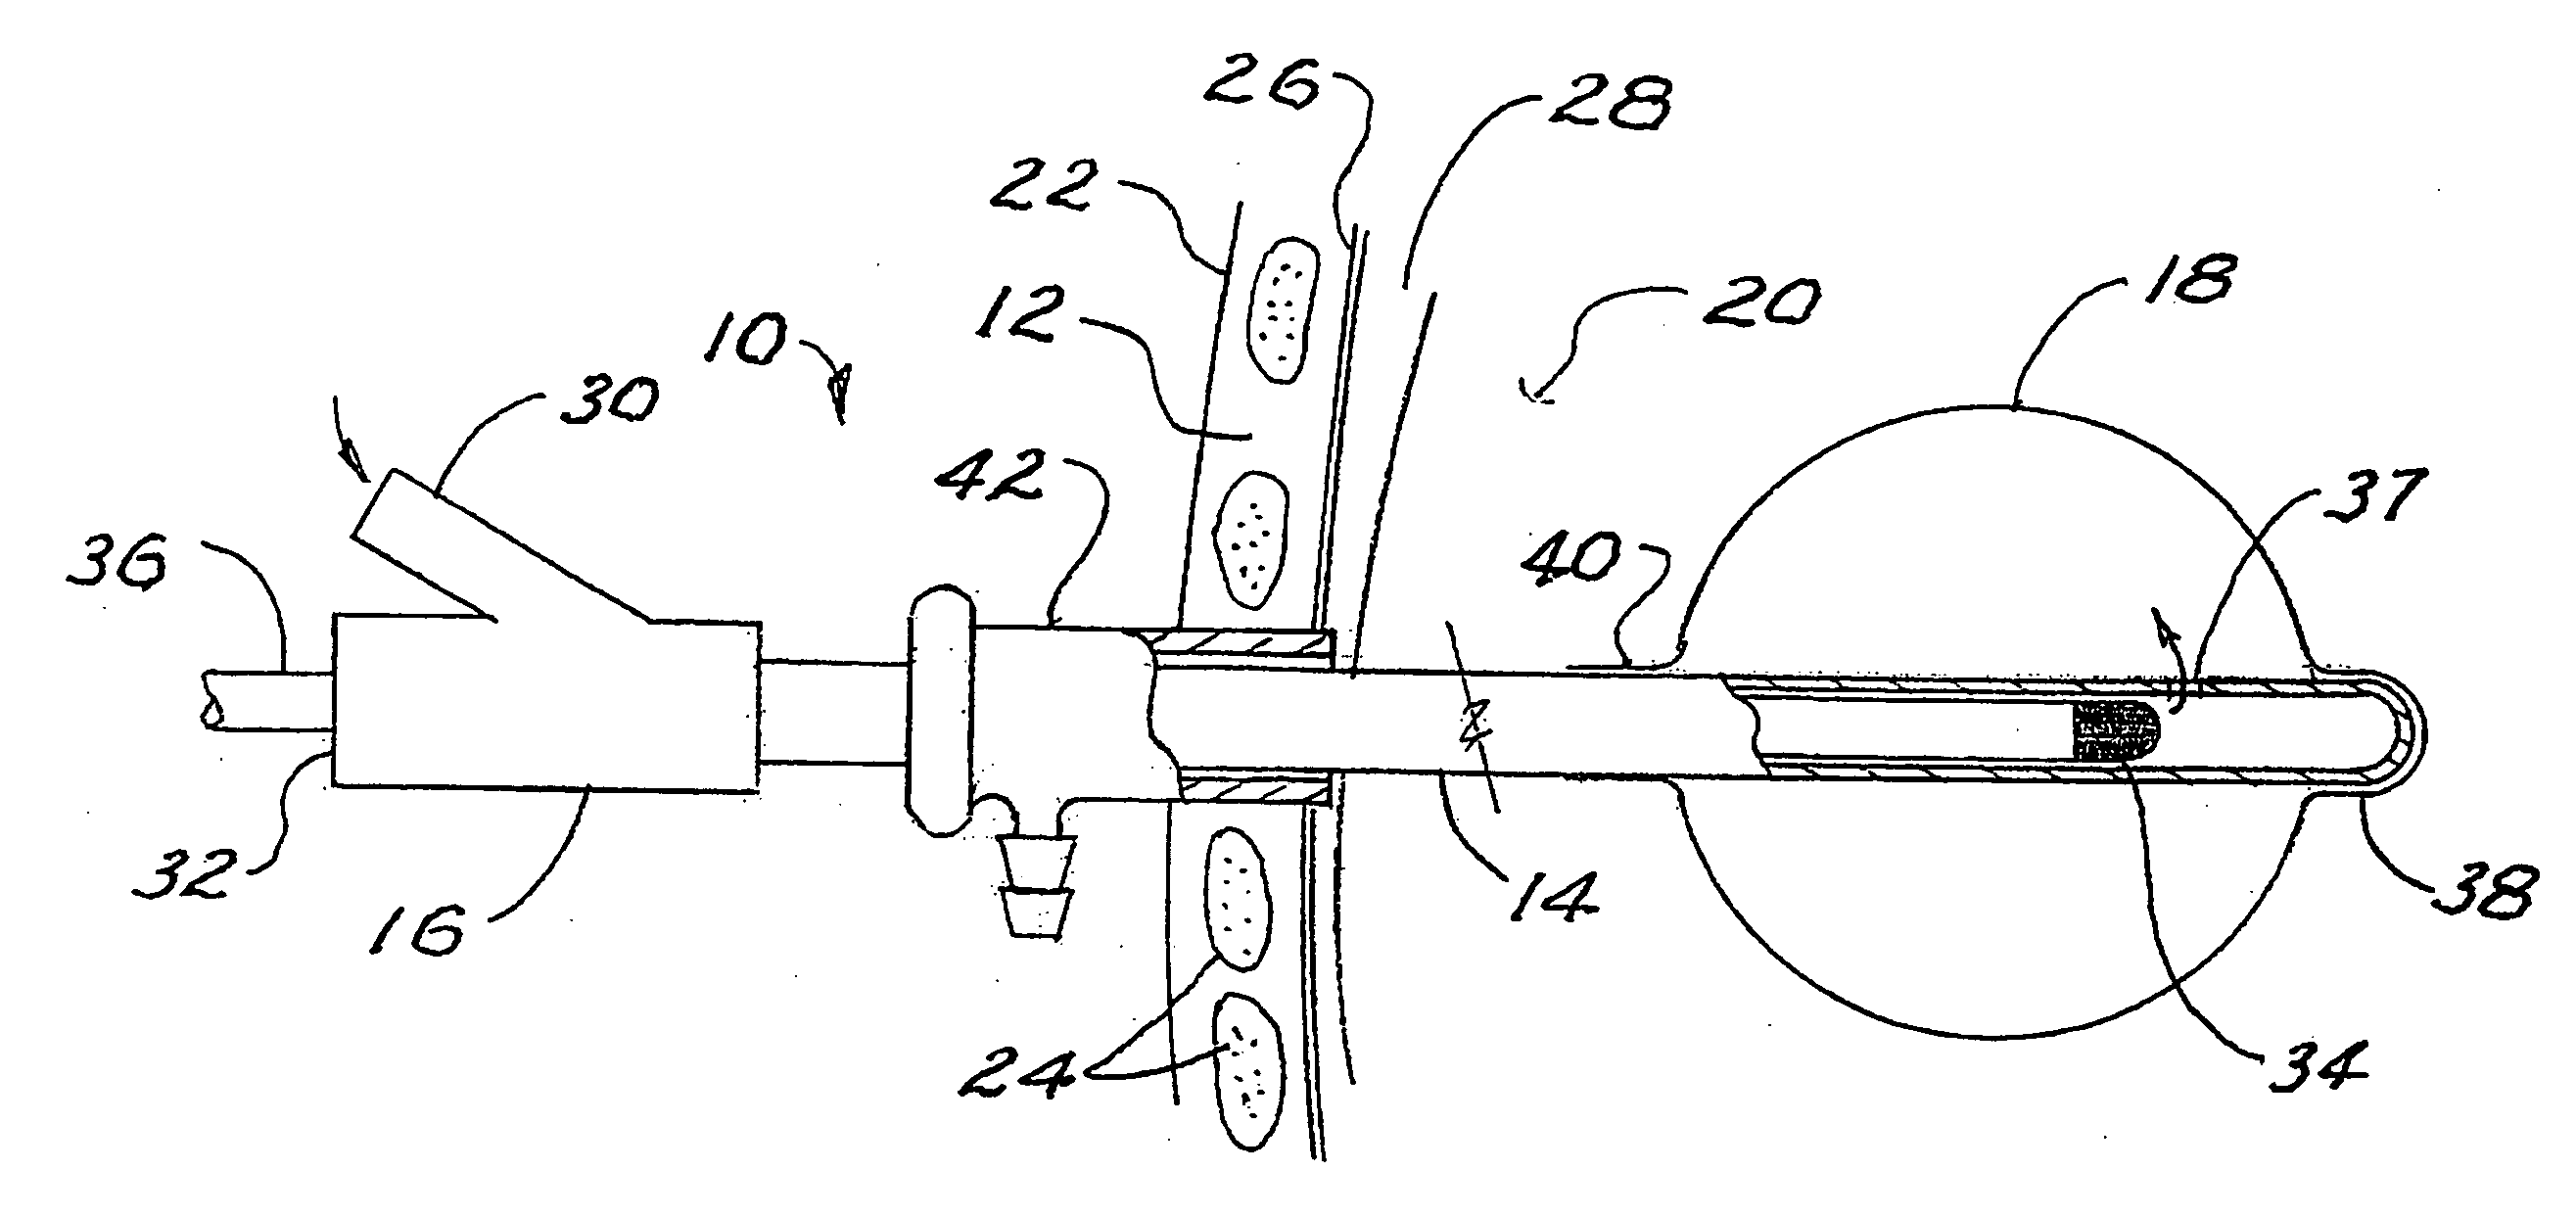 Brachytherapy apparatus and method for use with minimally invasive surgeries of the lung